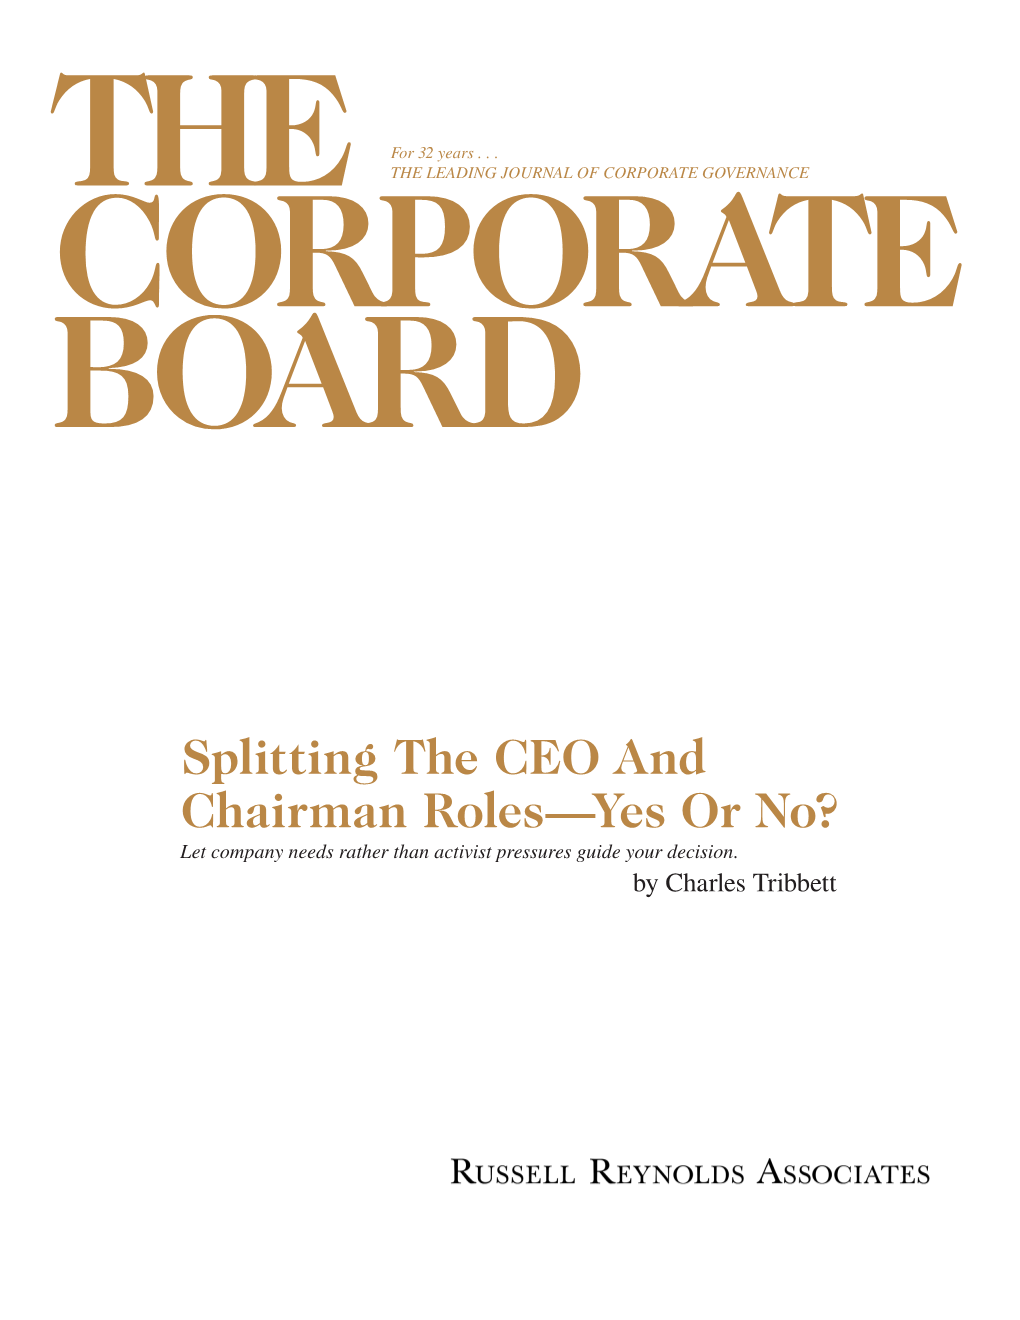 Splitting the CEO and Chairman Roles—Yes Or No? Let Company Needs Rather Than Activist Pressures Guide Your Decision